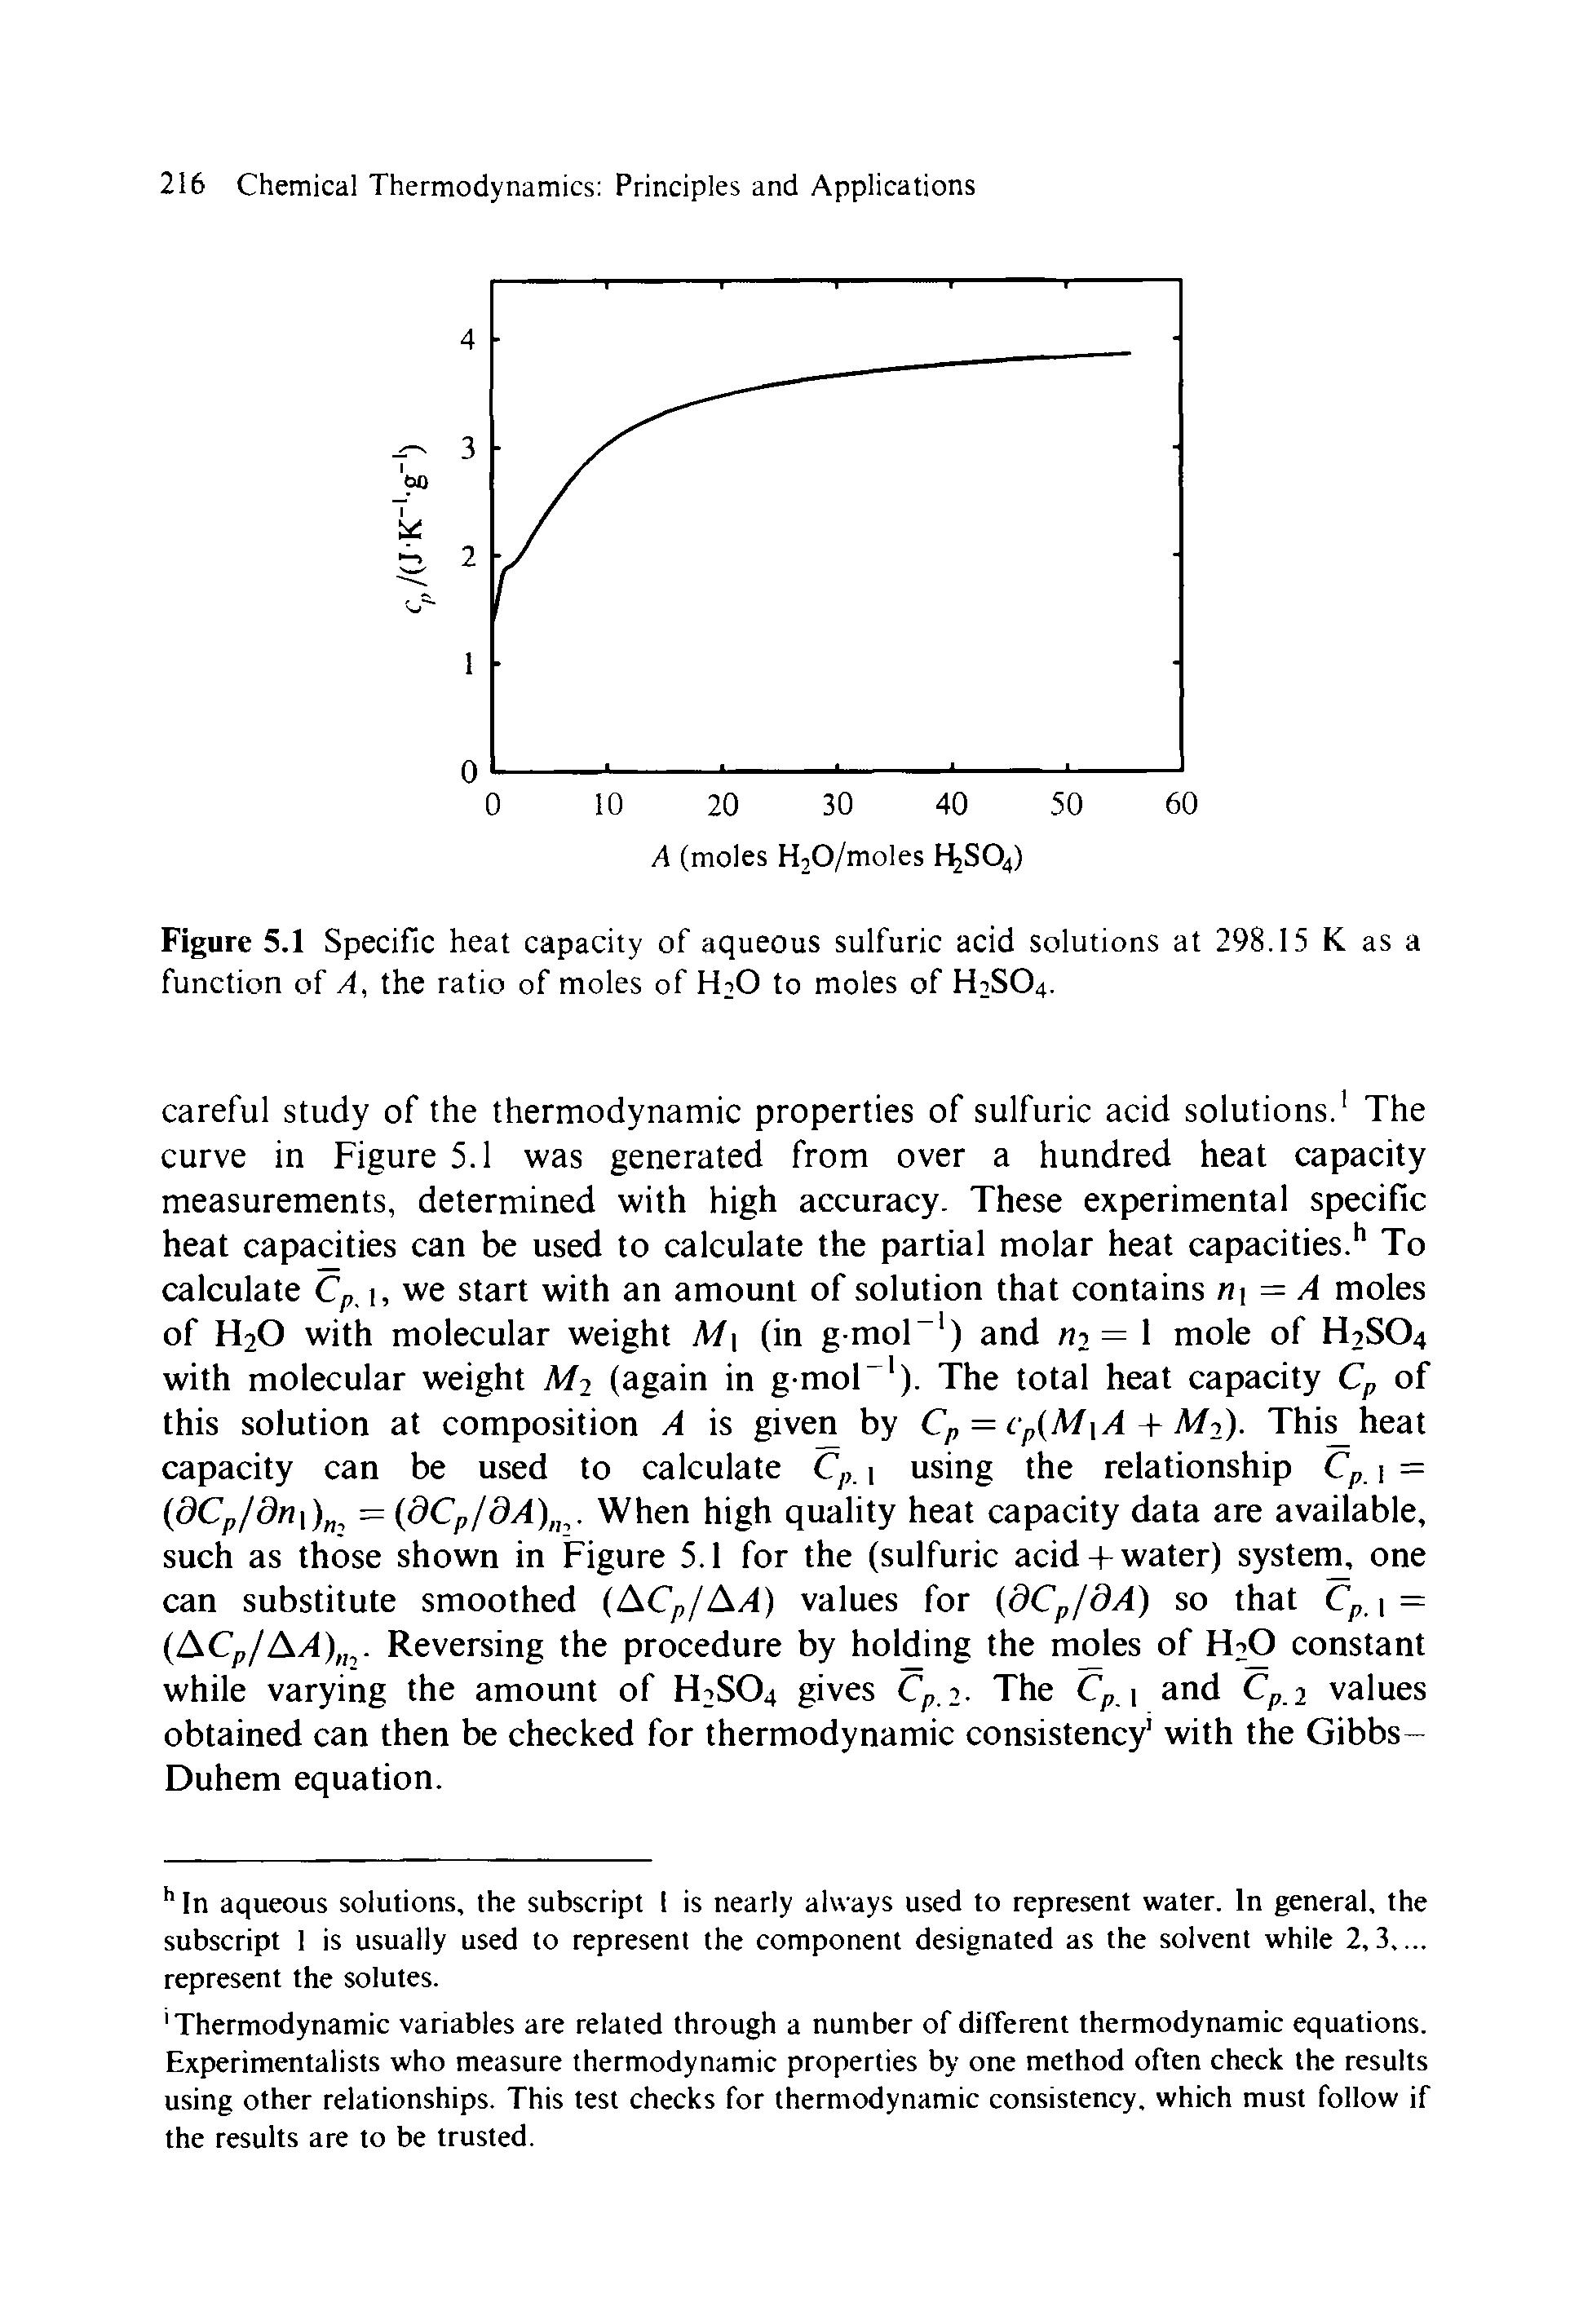 Figure 5.1 Specific heat capacity of aqueous sulfuric acid solutions at 298.15 K as a function of A, the ratio of moles of H O to moles of H2SO4.